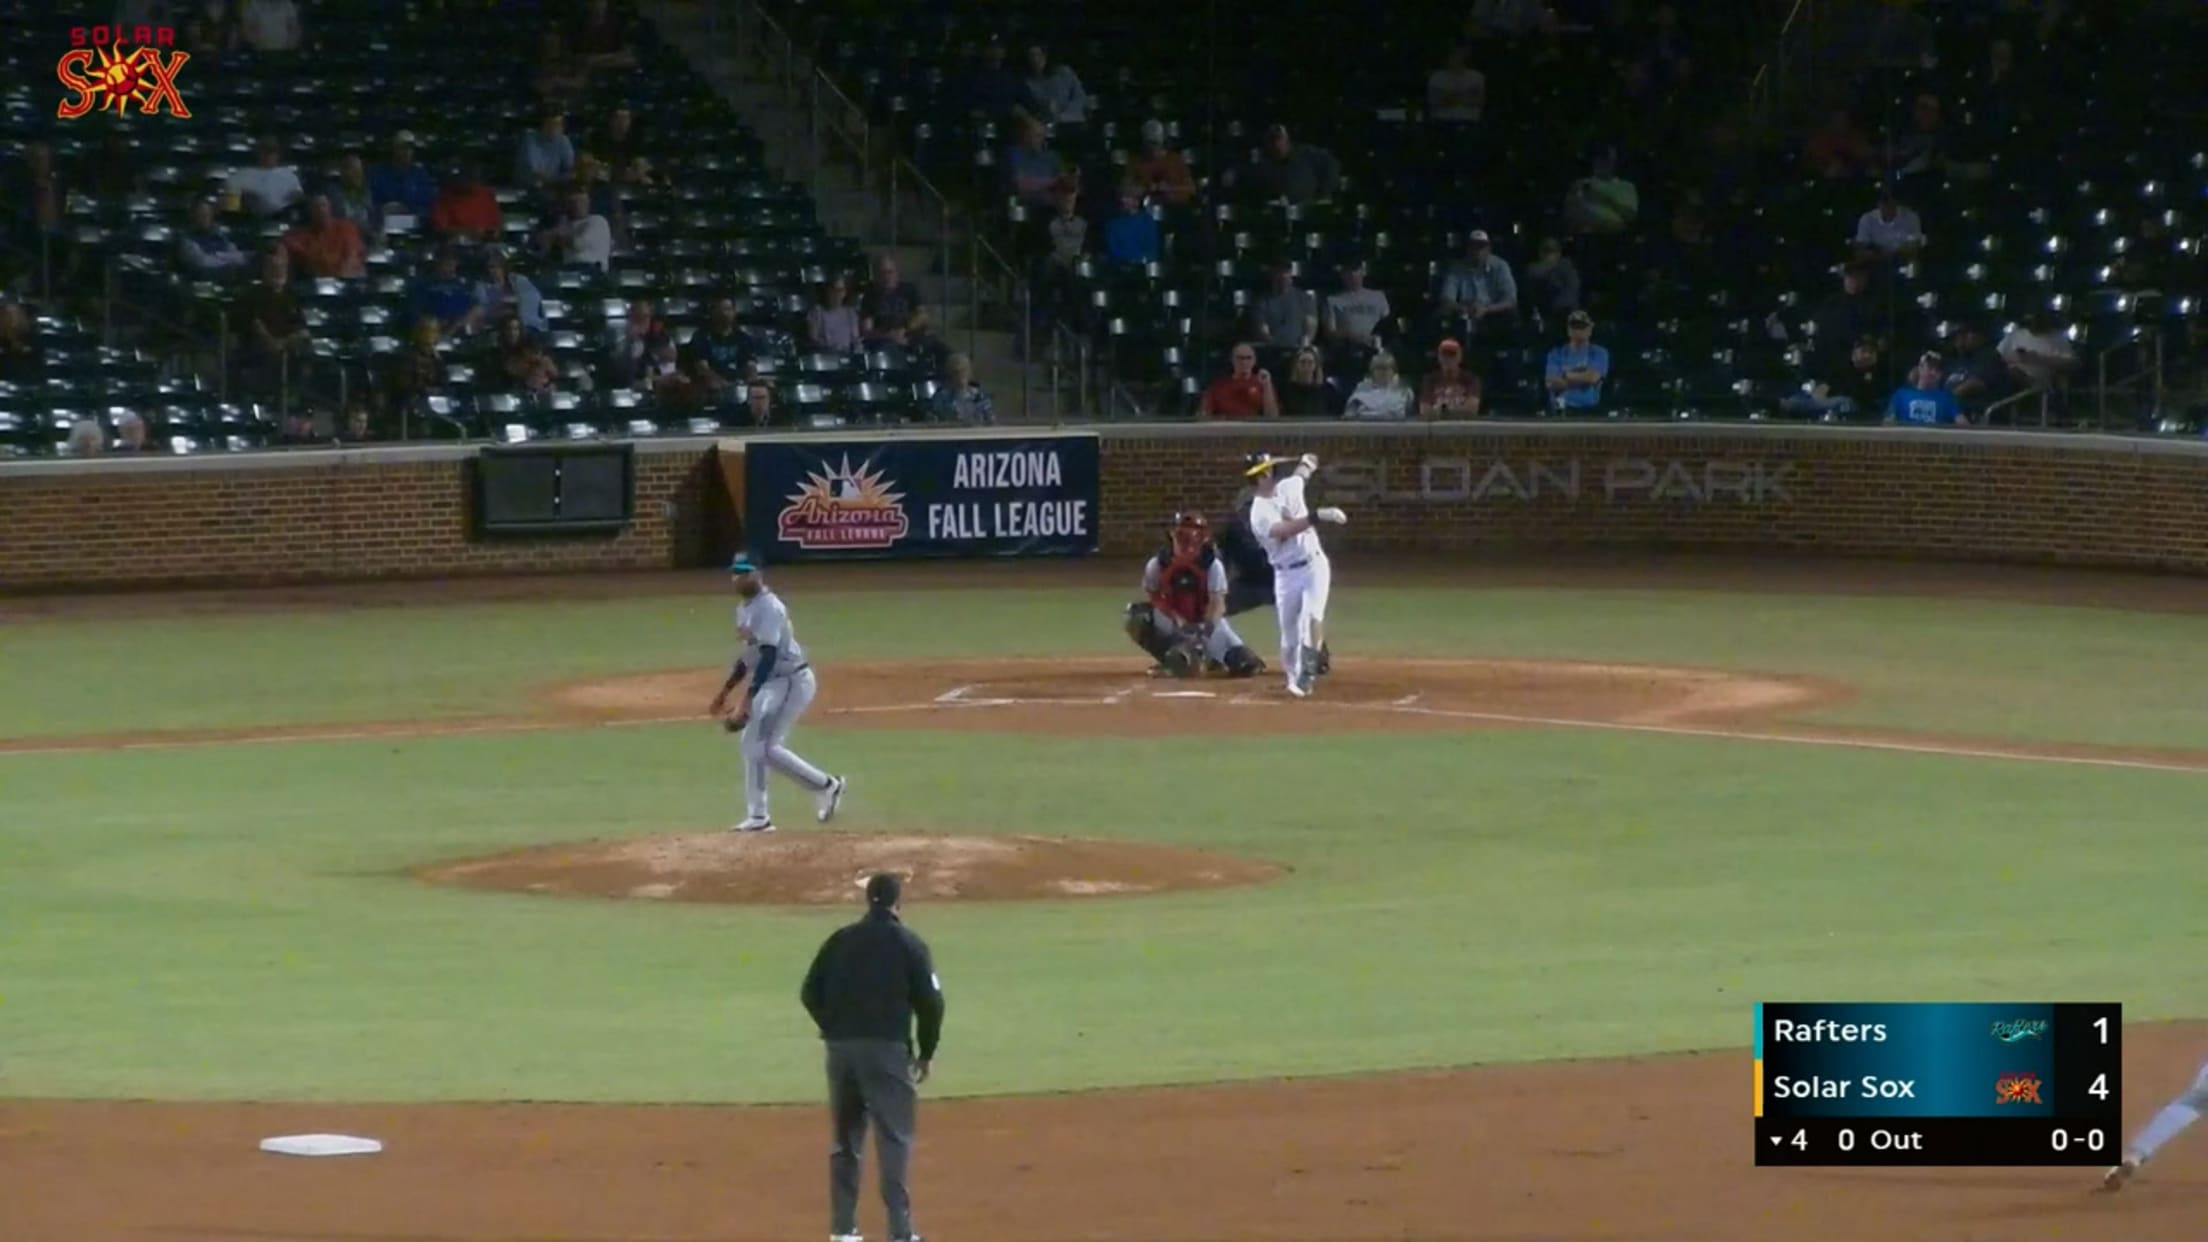 Max Muncy's 5th double of the AFL